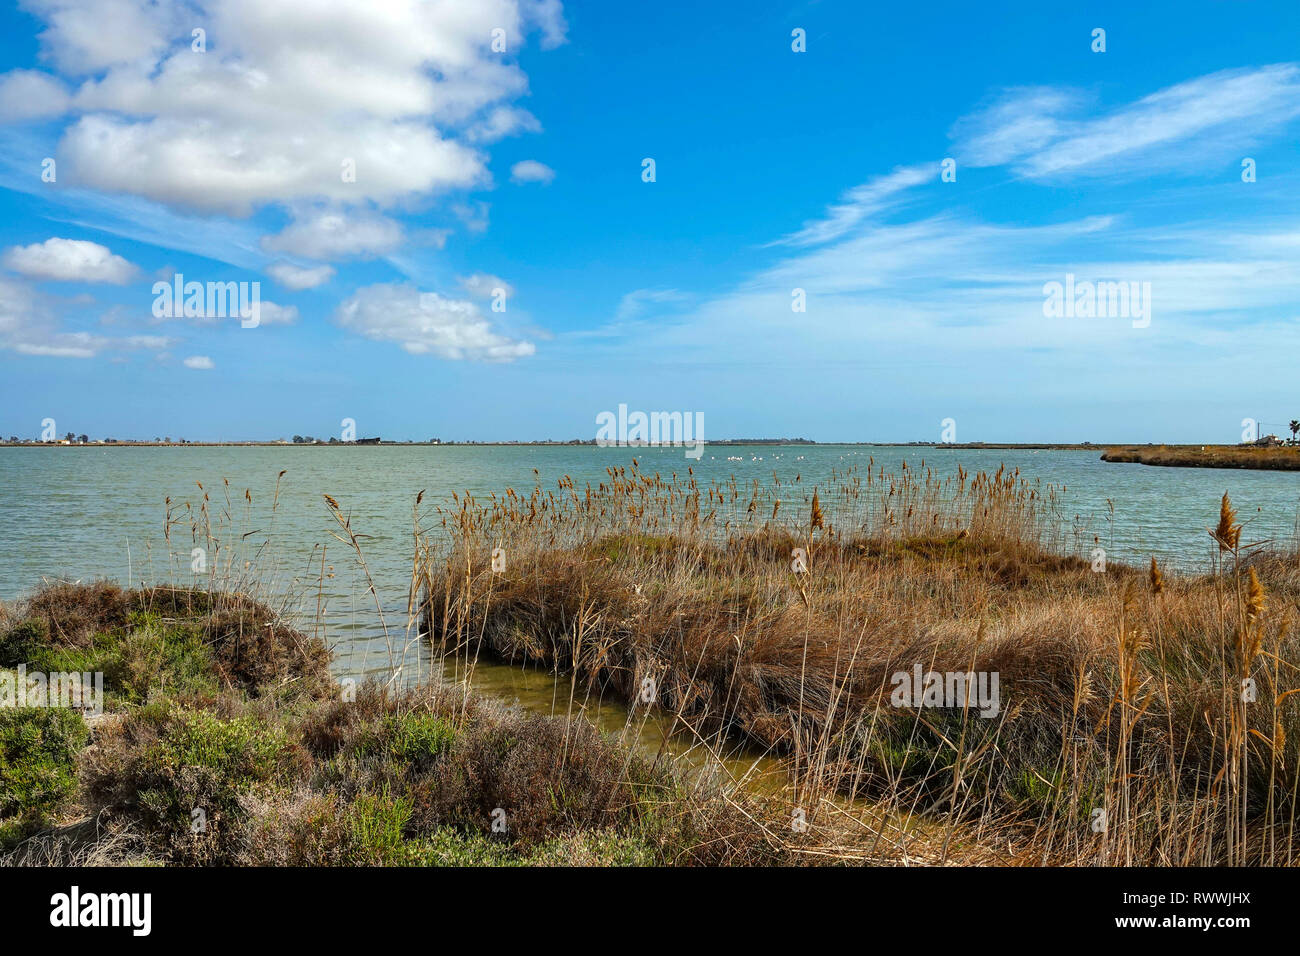 Wide open spaces, lakes and reed-beds, The Ebro Delta nature reserve, near Amposta, Catalunya, Spain Stock Photo